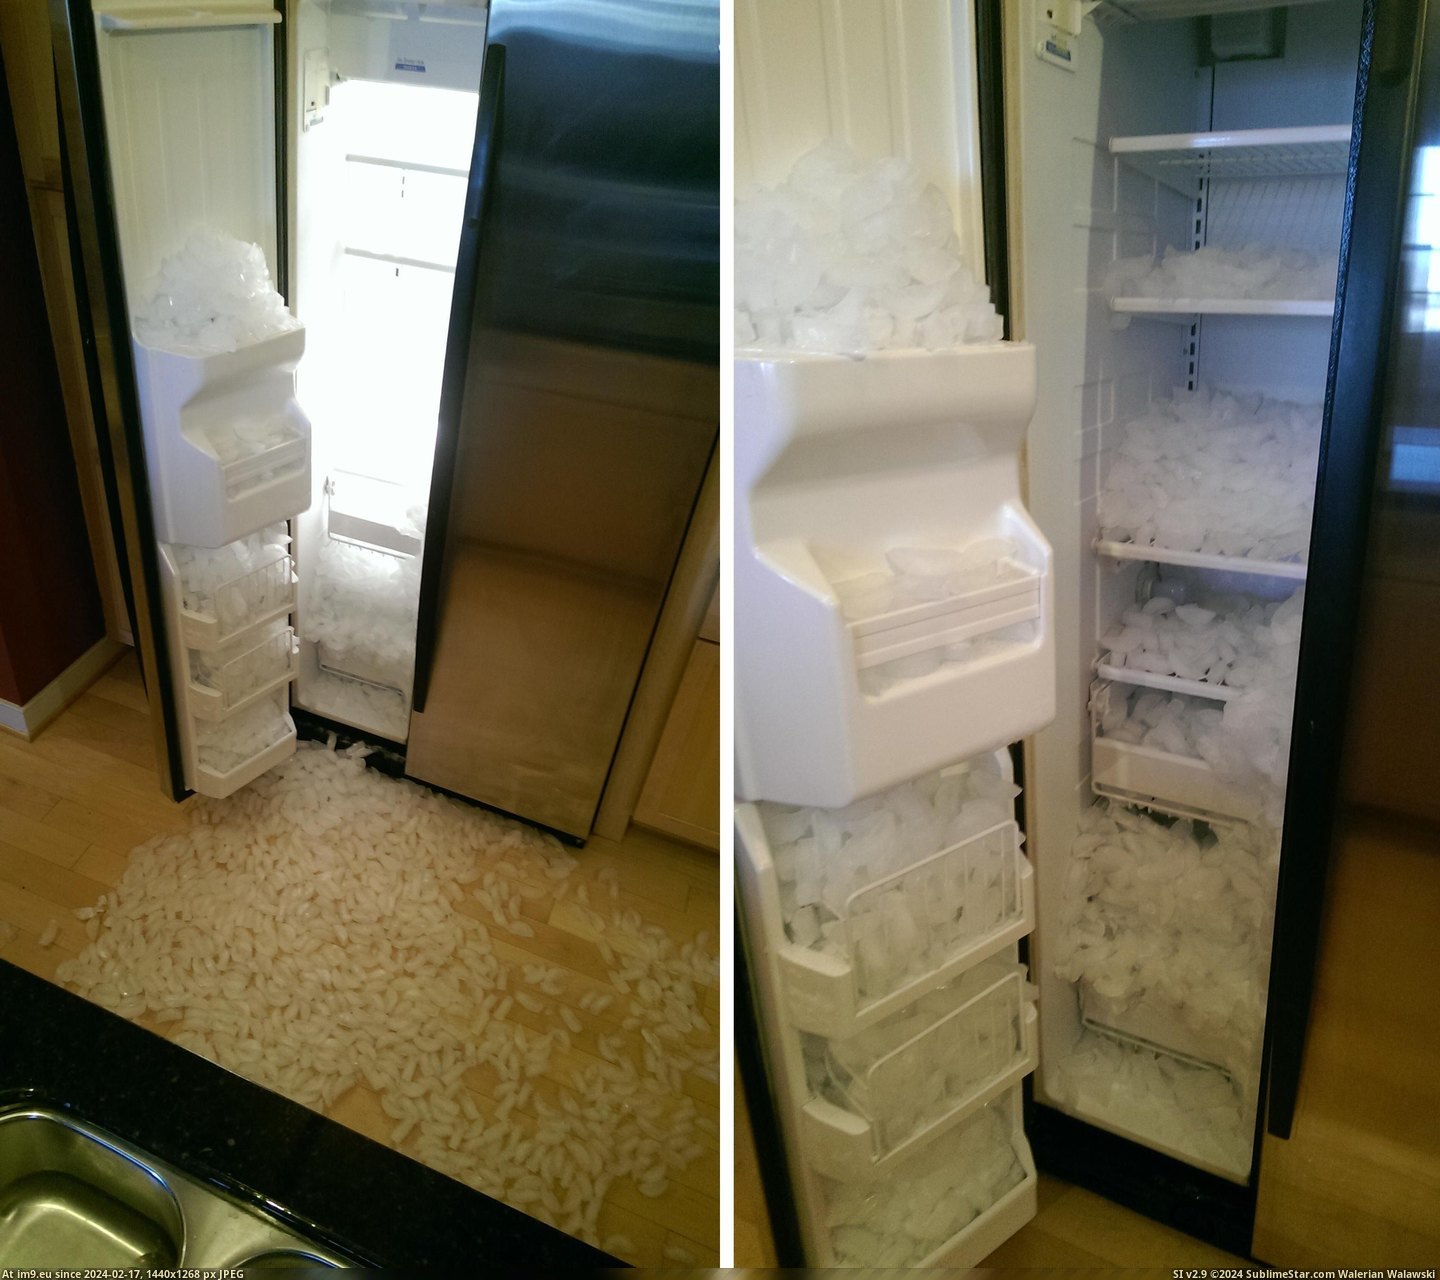 #Funny #Ice #Goin #Works #Maker [Funny] My ice maker works. So I got that goin for me which is ice Pic. (Bild von album My r/FUNNY favs))